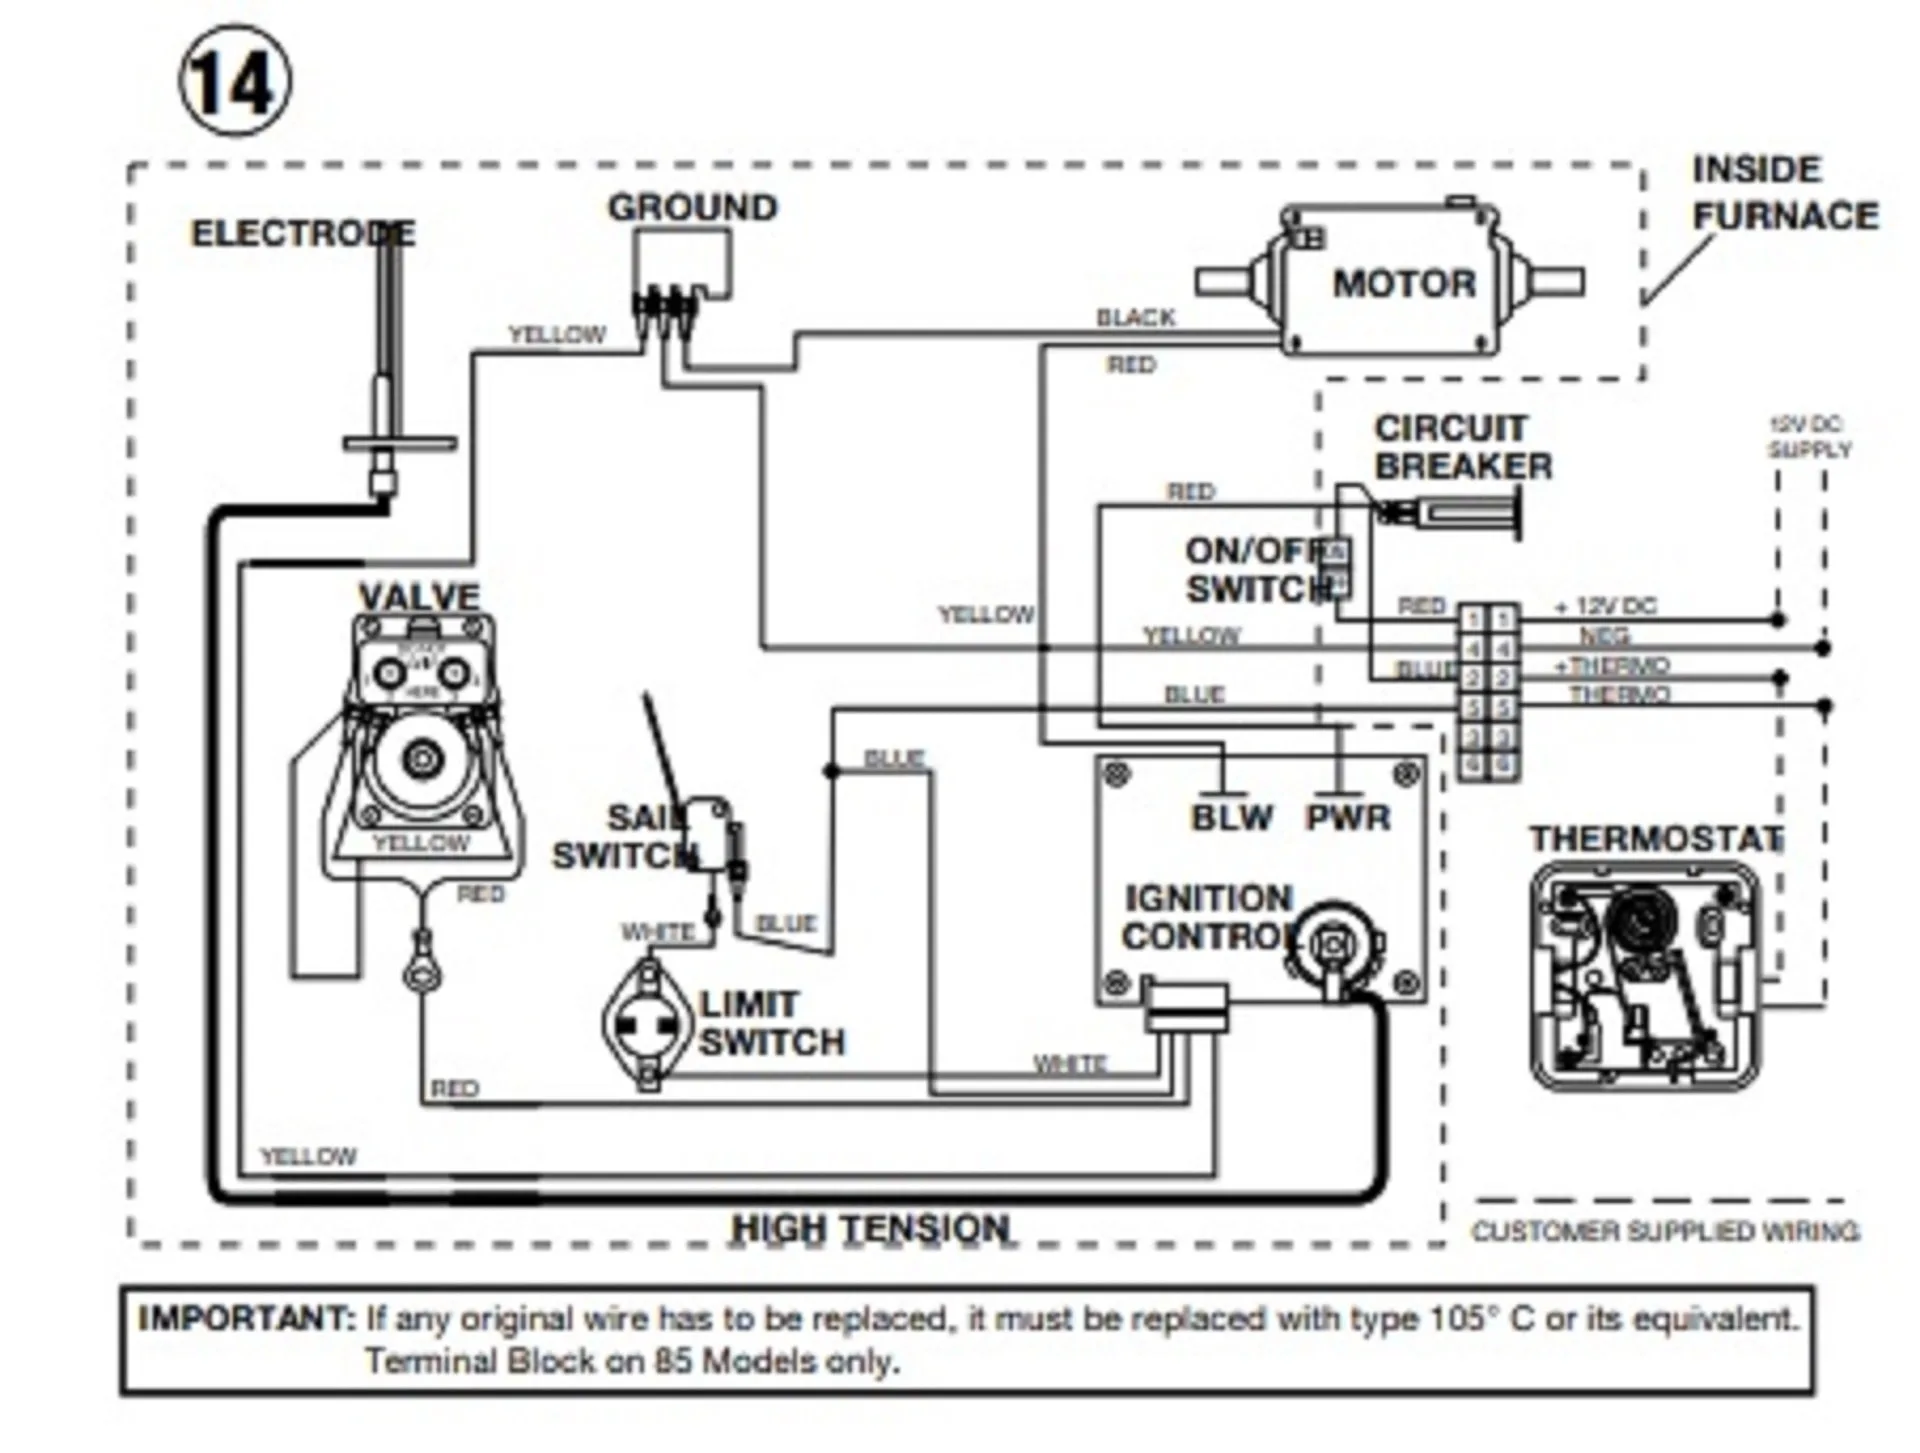 Is your RV furnace not working? Check out the wiring schematic for an Atwood/Dometic RV furnace. (Diagram and photo credit: Atwood/Dometic)